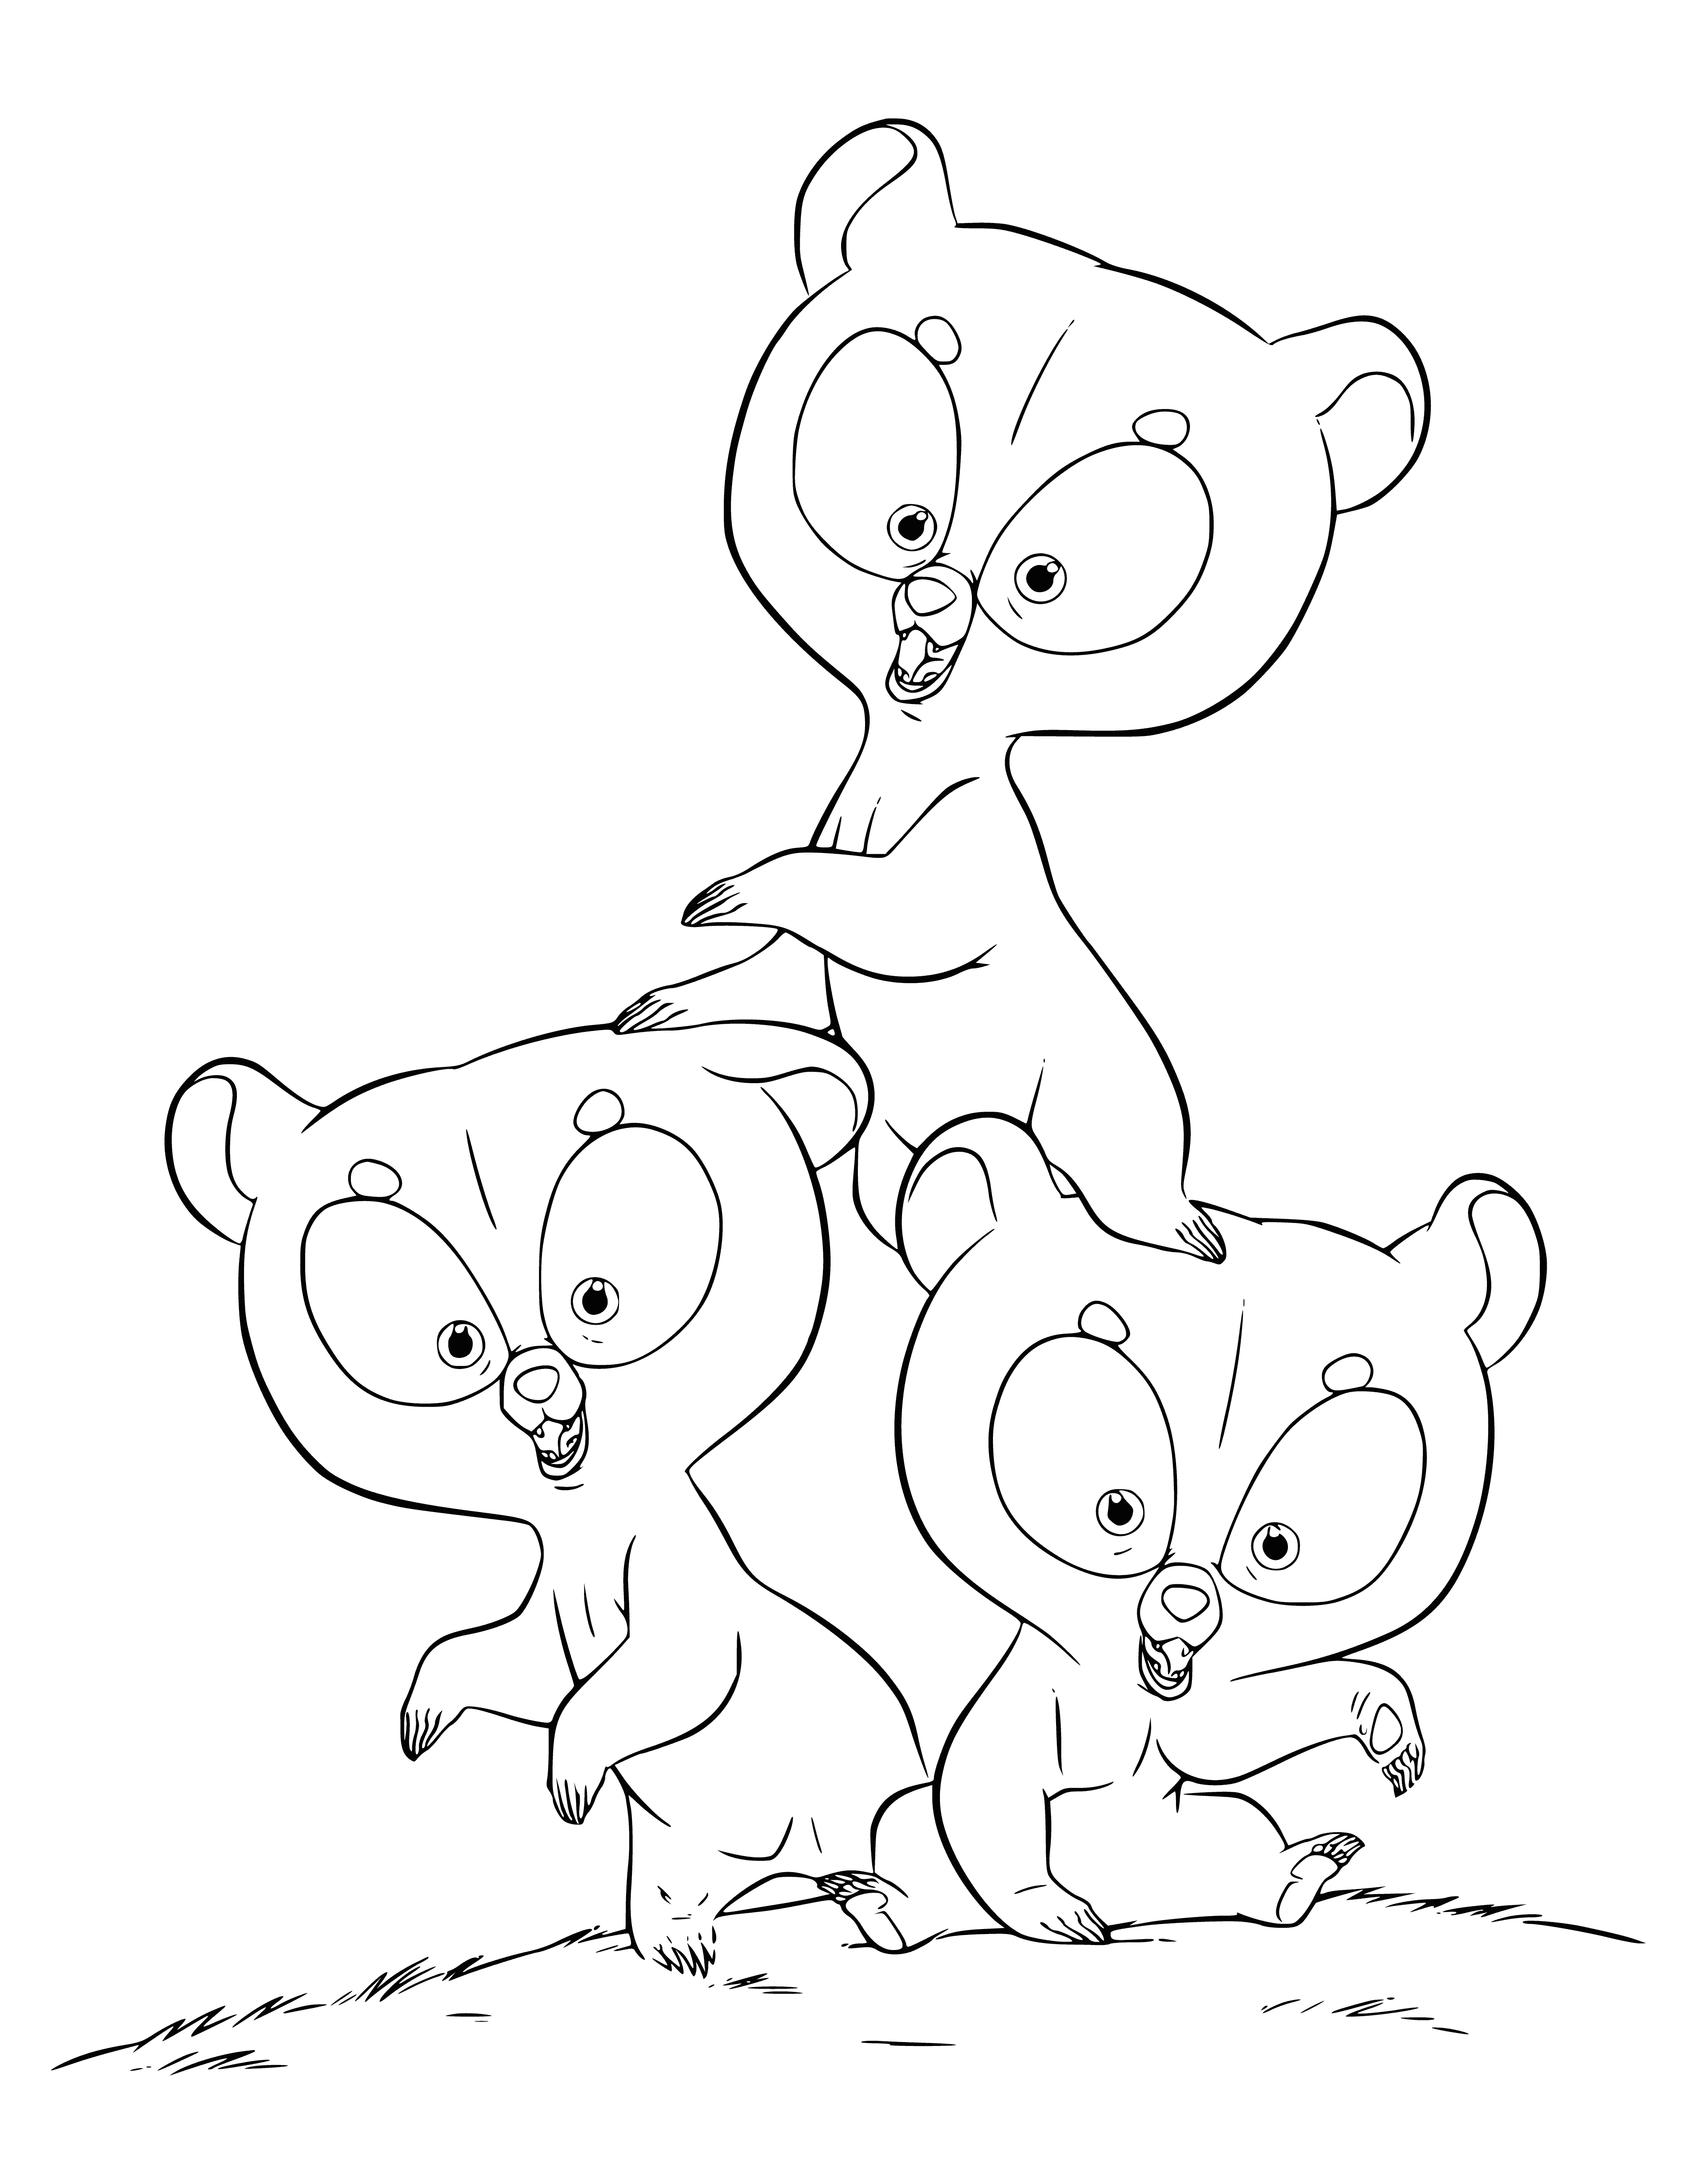 coloring page: Three baby bears cuddled in the grass, soft and fluffy, big eyes with small noses; so cute and innocent!